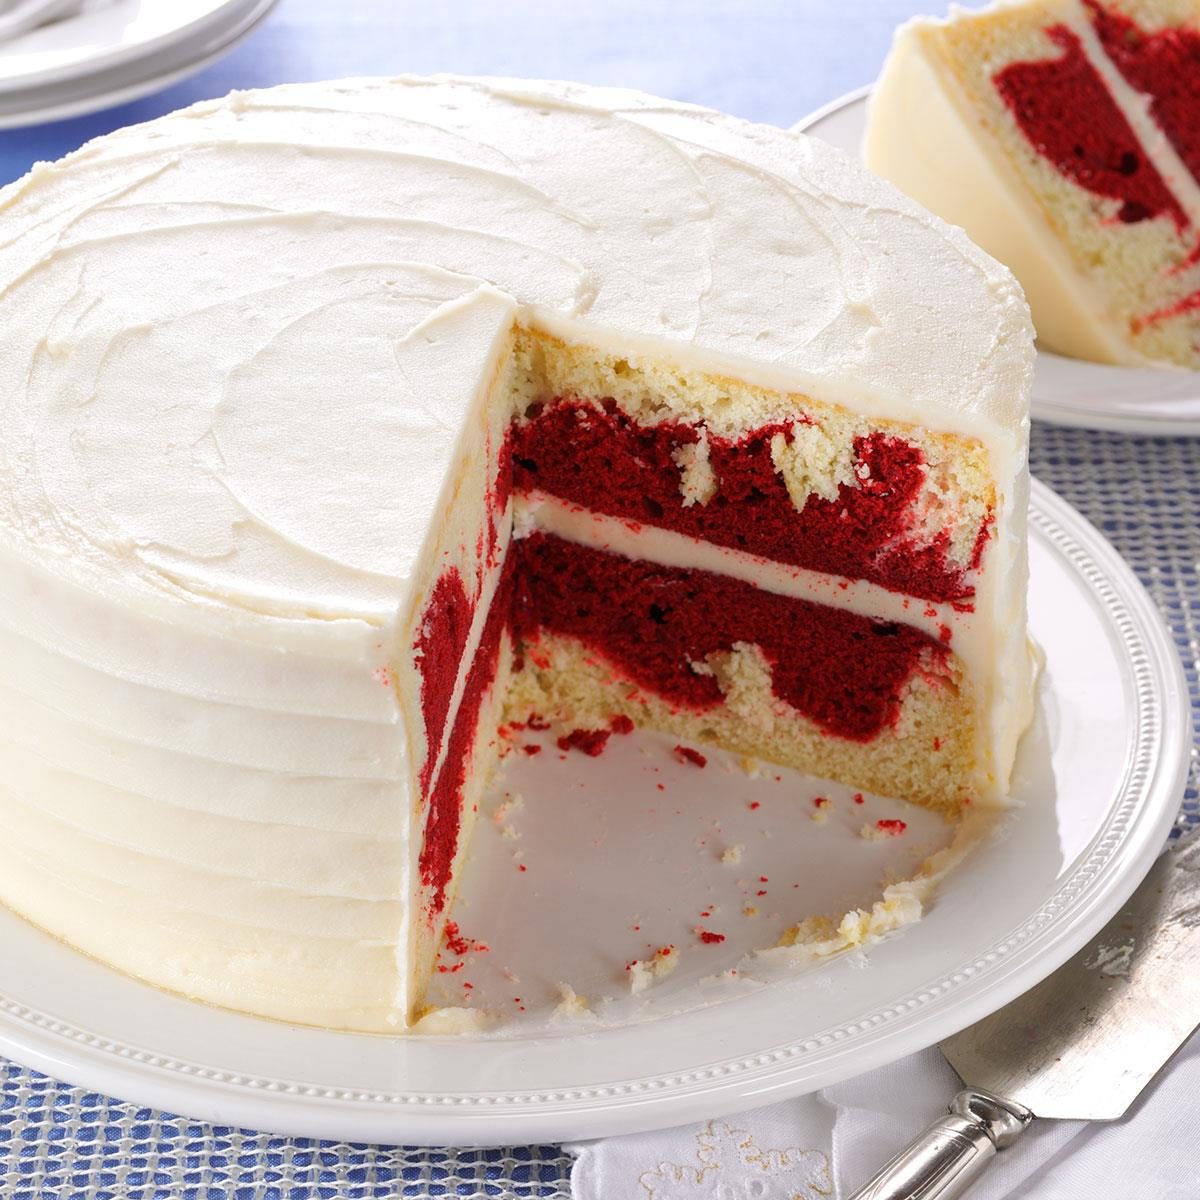 How to Make Red Velvet Cake (with Pictures) - wikiHow